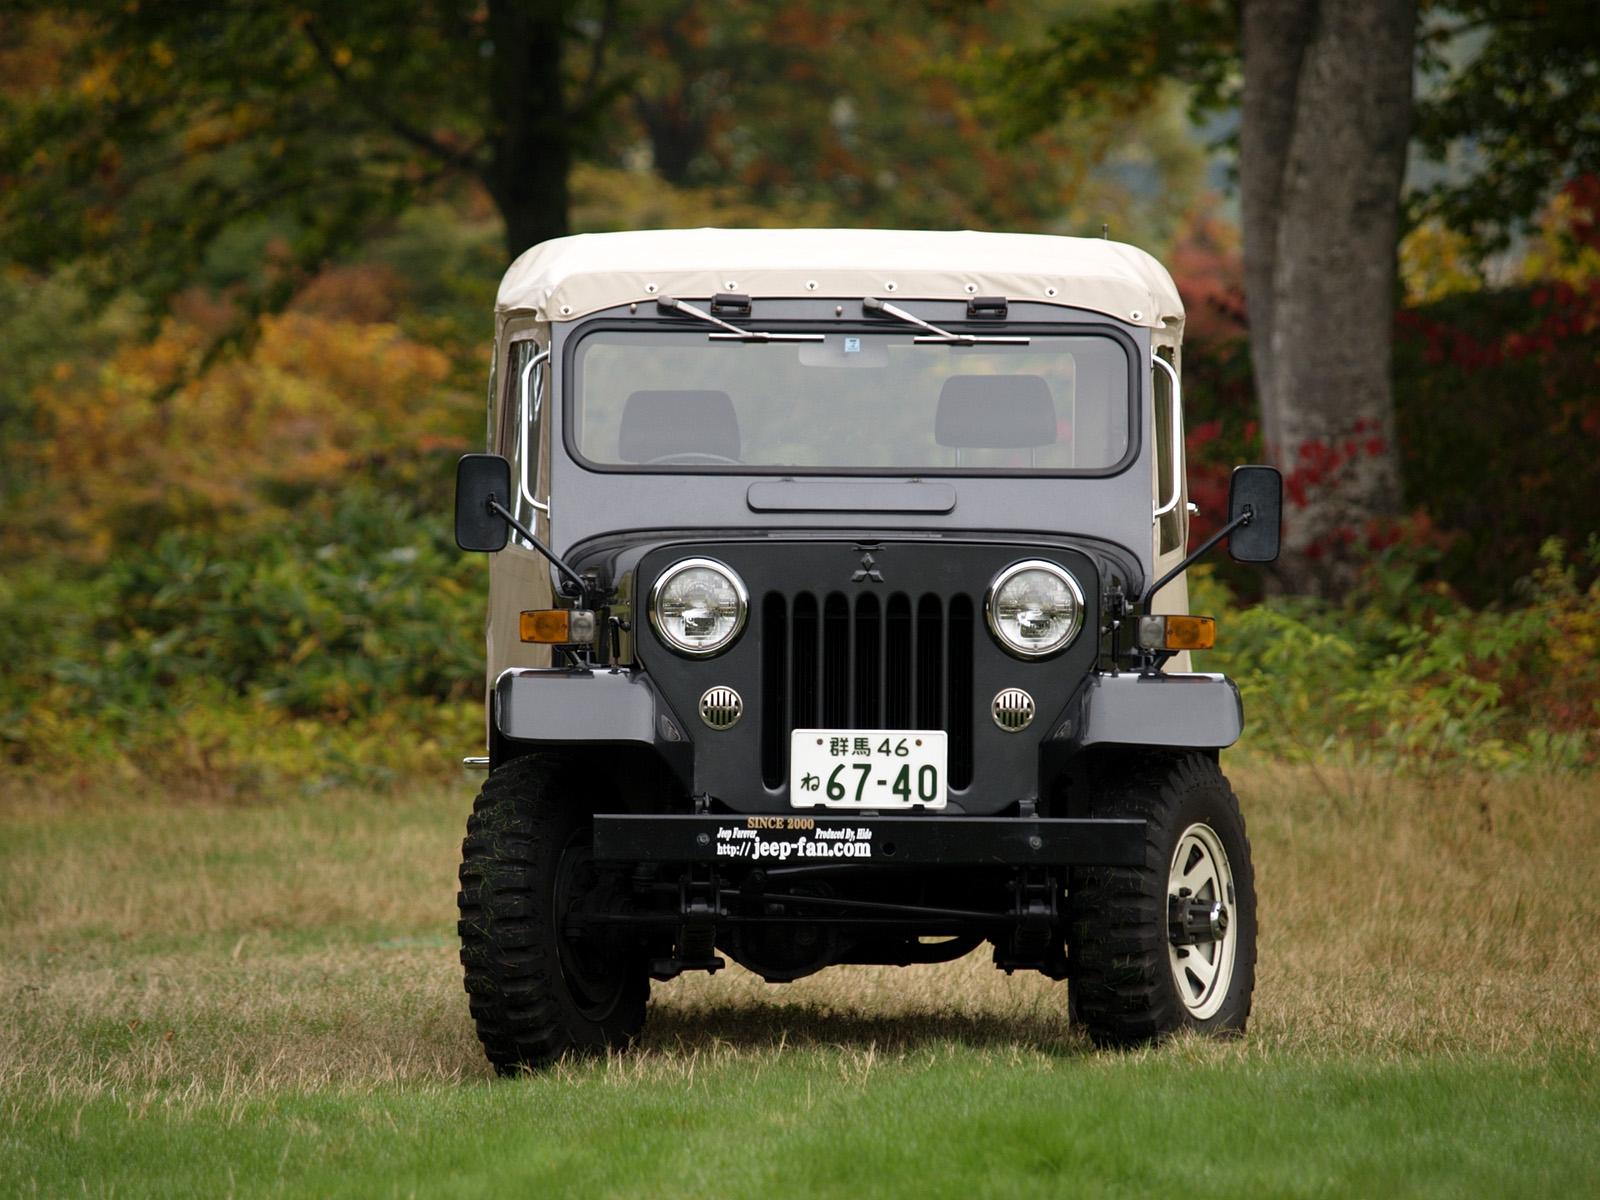 Jeep Forever 壁紙プレゼント